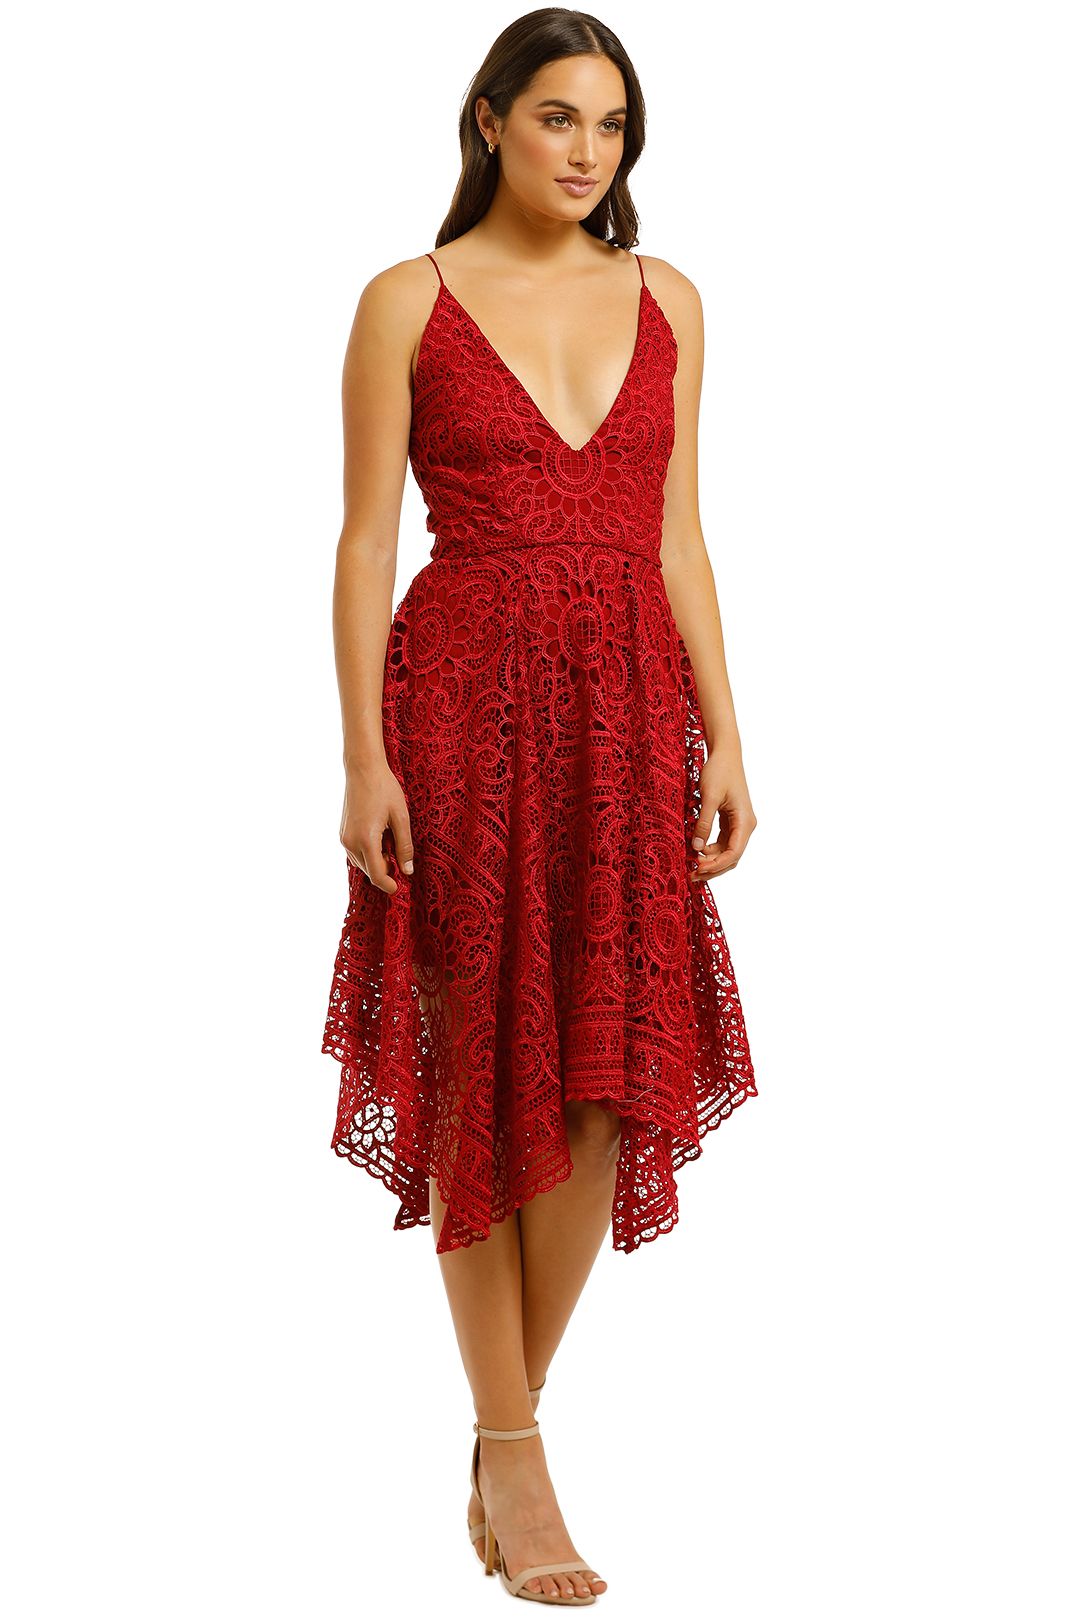 Nicholas - Floral Lace Ball Dress - Berry Red - Side